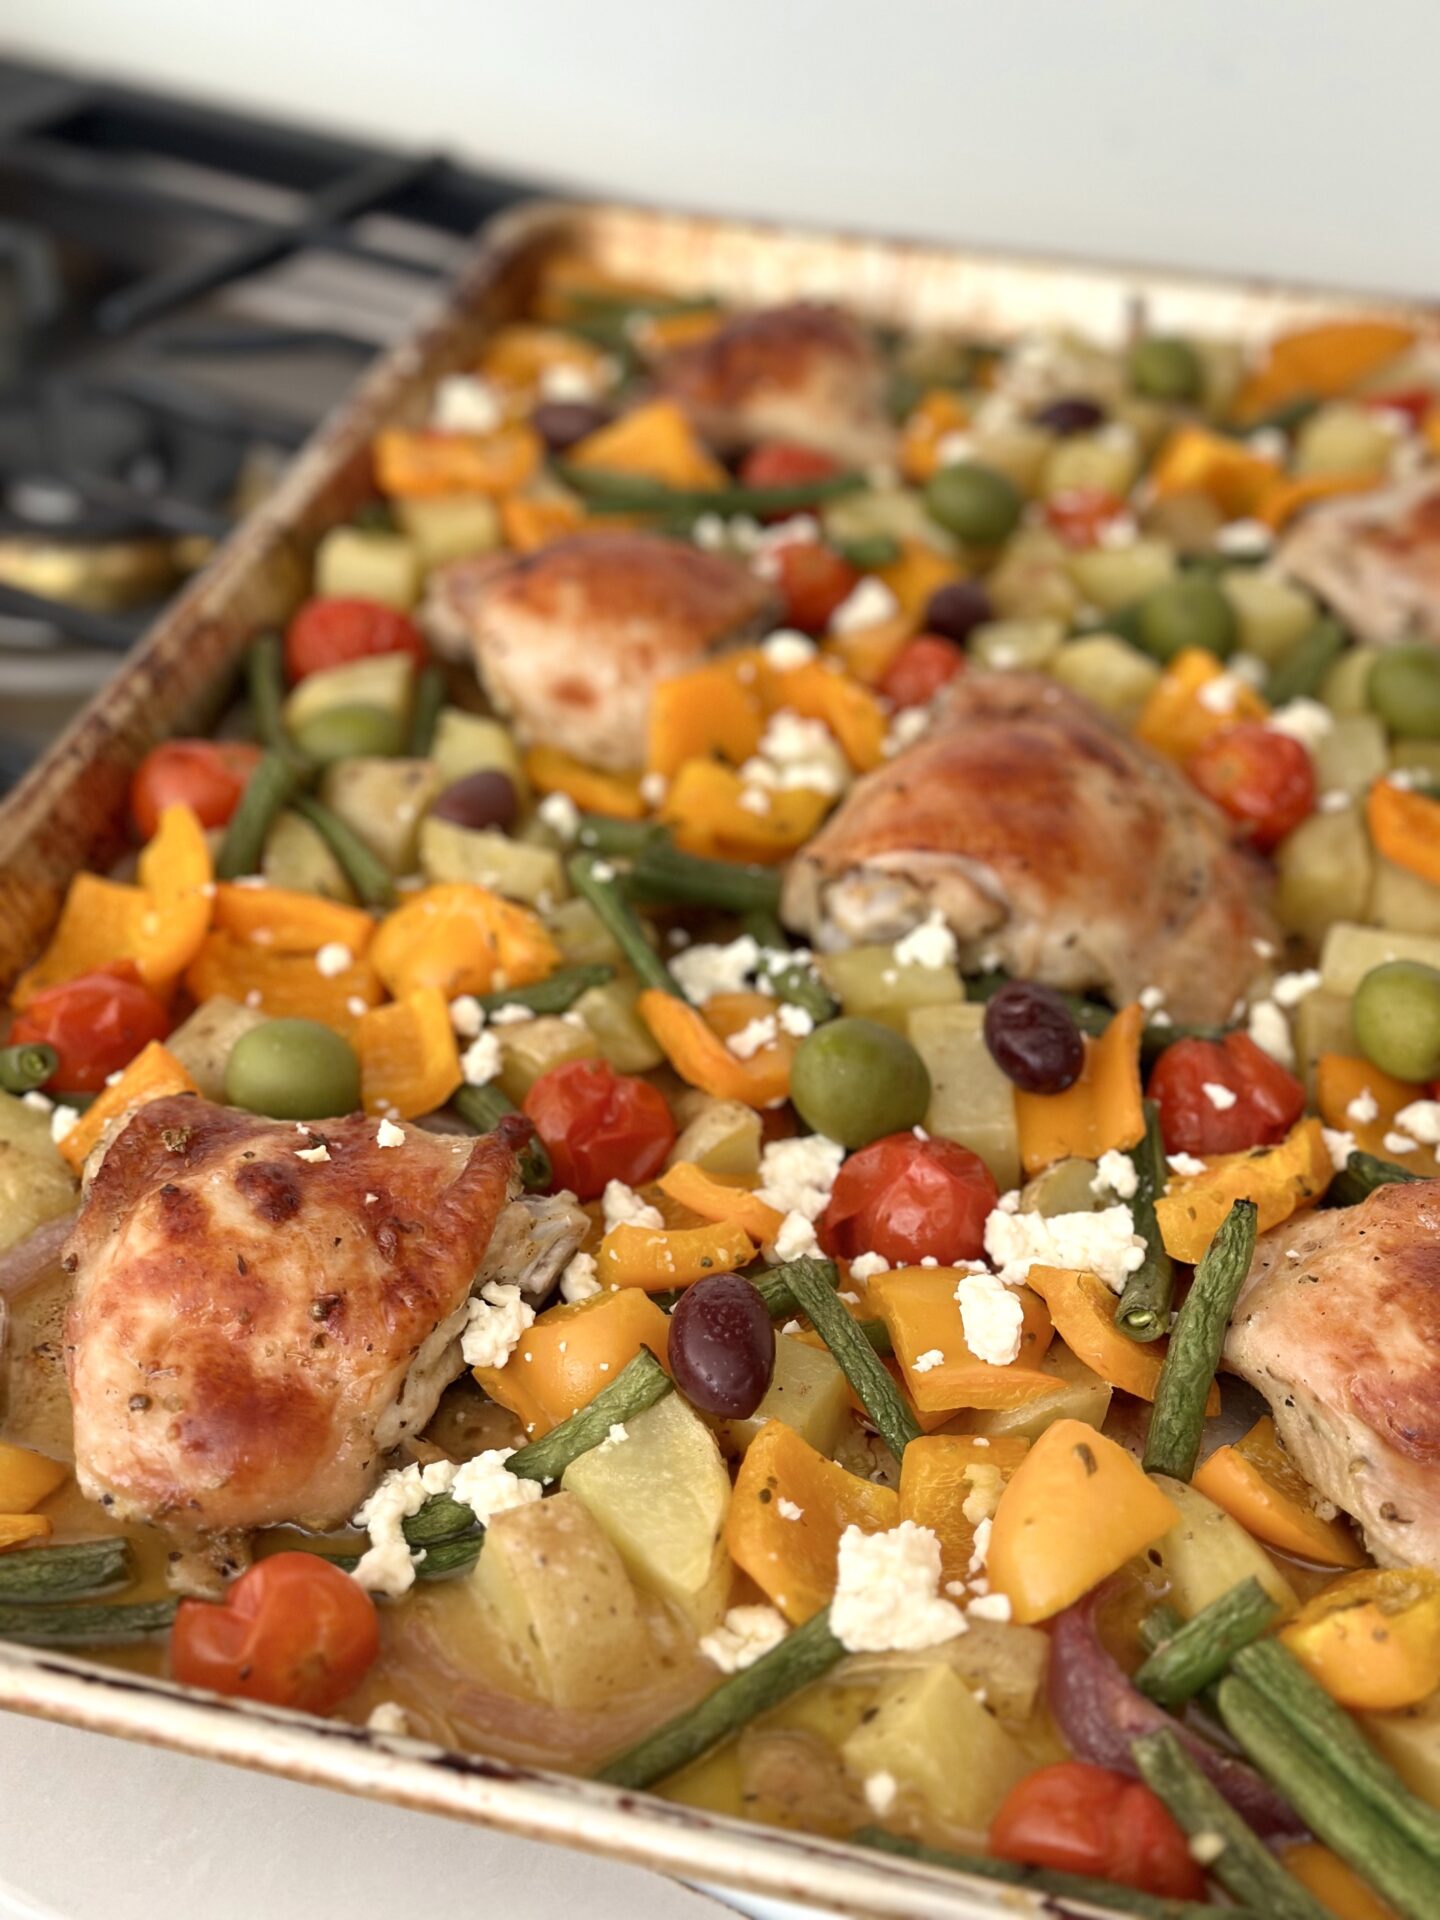 A large pan of Greek Sheet Pan Dinner that has roasted to perfection in the oven is seen resting on a cook top. The dinner features golden chicken thighs nestled amongst roasted orange bell peppers, chopped potatoes, red onion wedges and green beans. The meal is garnished with crumbled feta cheese and olives.